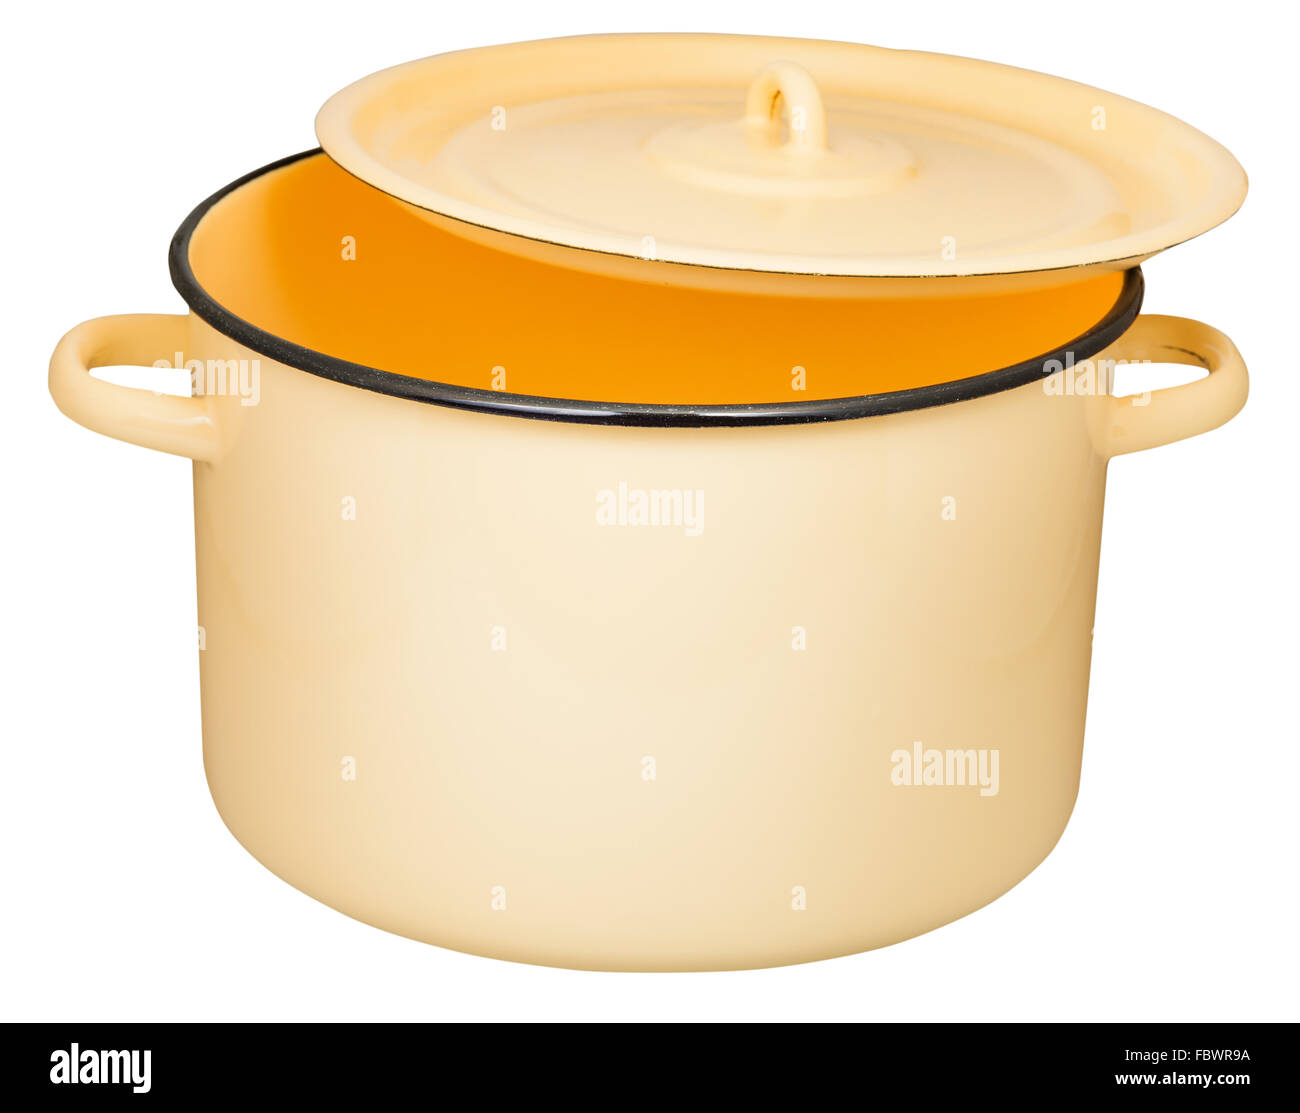 https://c8.alamy.com/comp/FBWR9A/classic-enamel-stockpot-with-slightly-ajar-cover-isolated-on-white-FBWR9A.jpg